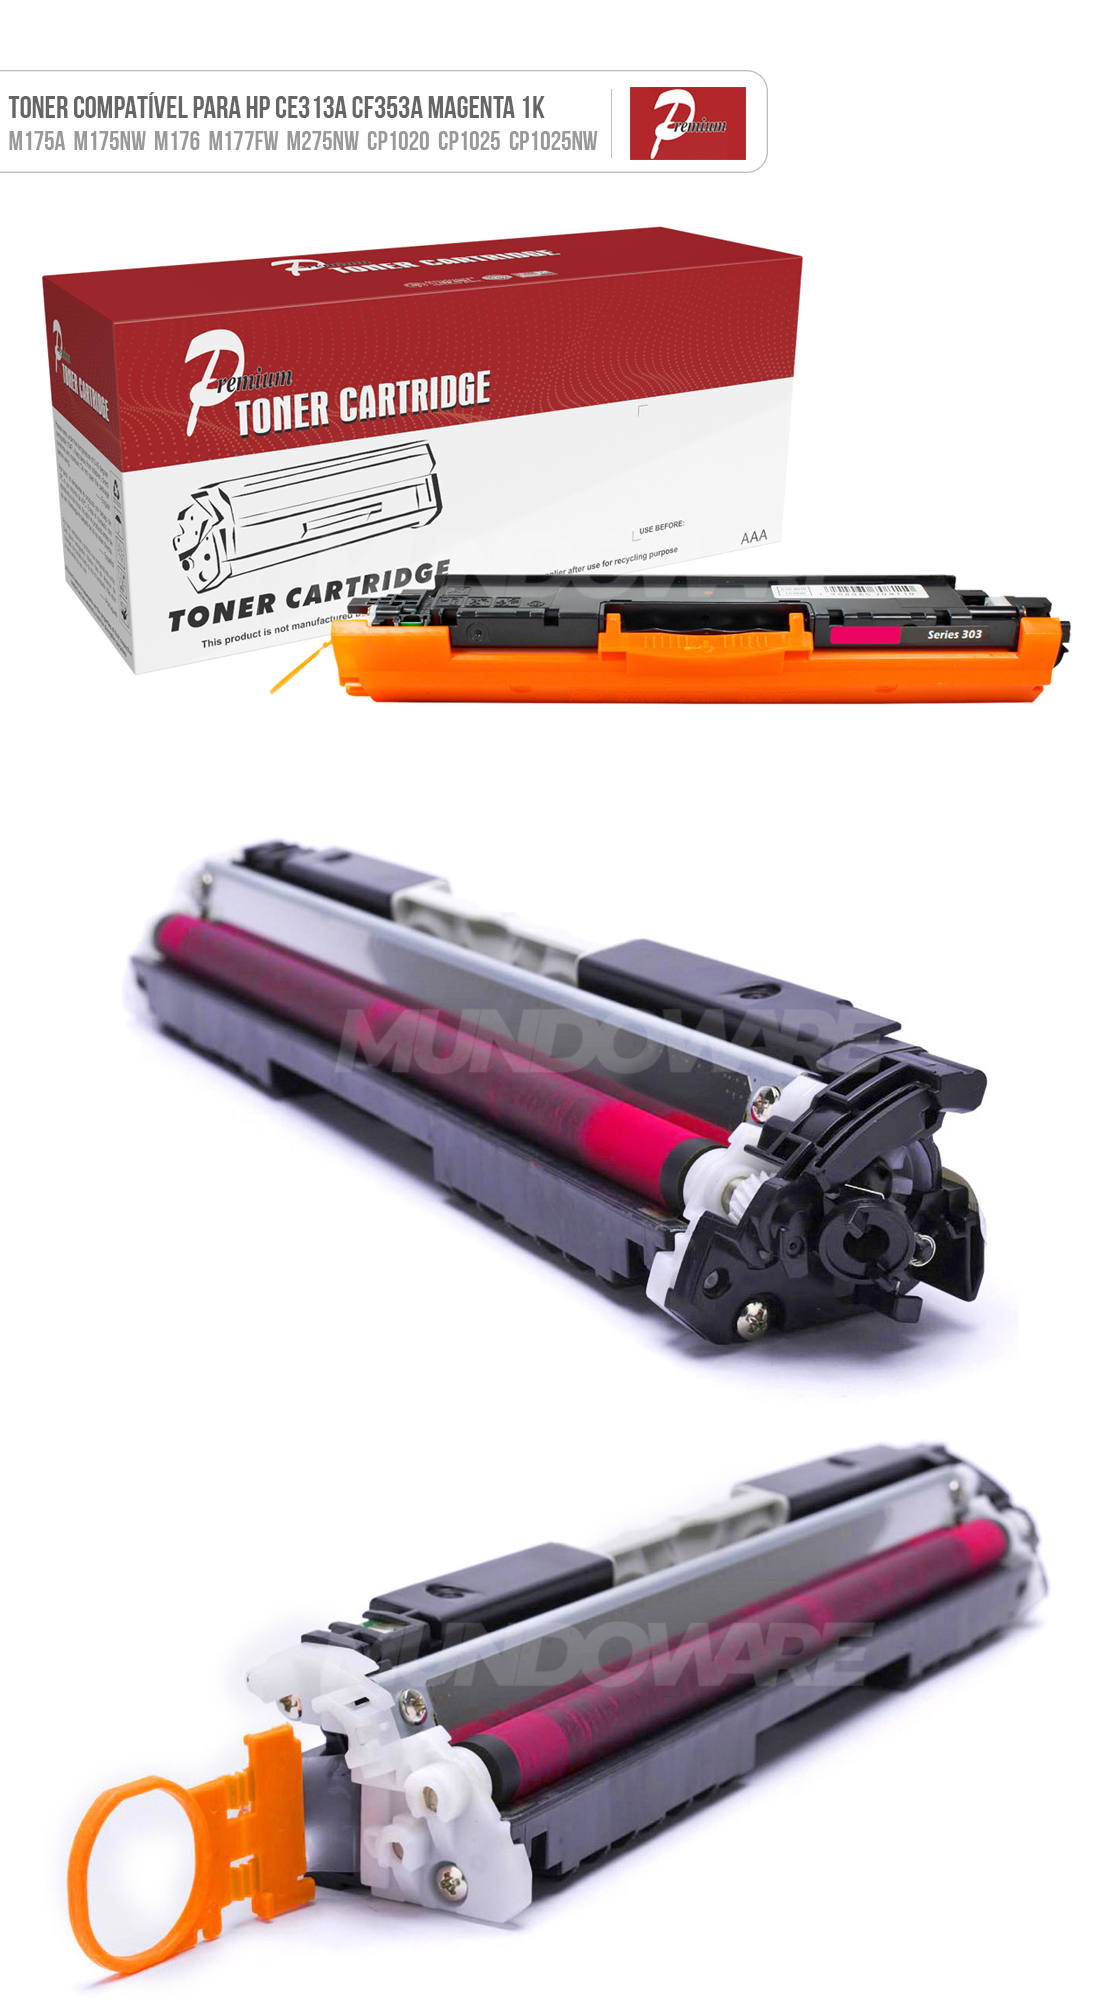 Toner Compatvel com HP CE313A CF353A para CP-1025 M175a M175nw M176 M177fw M275nw 175a CP1025nw ByQualy Magenta 1.000